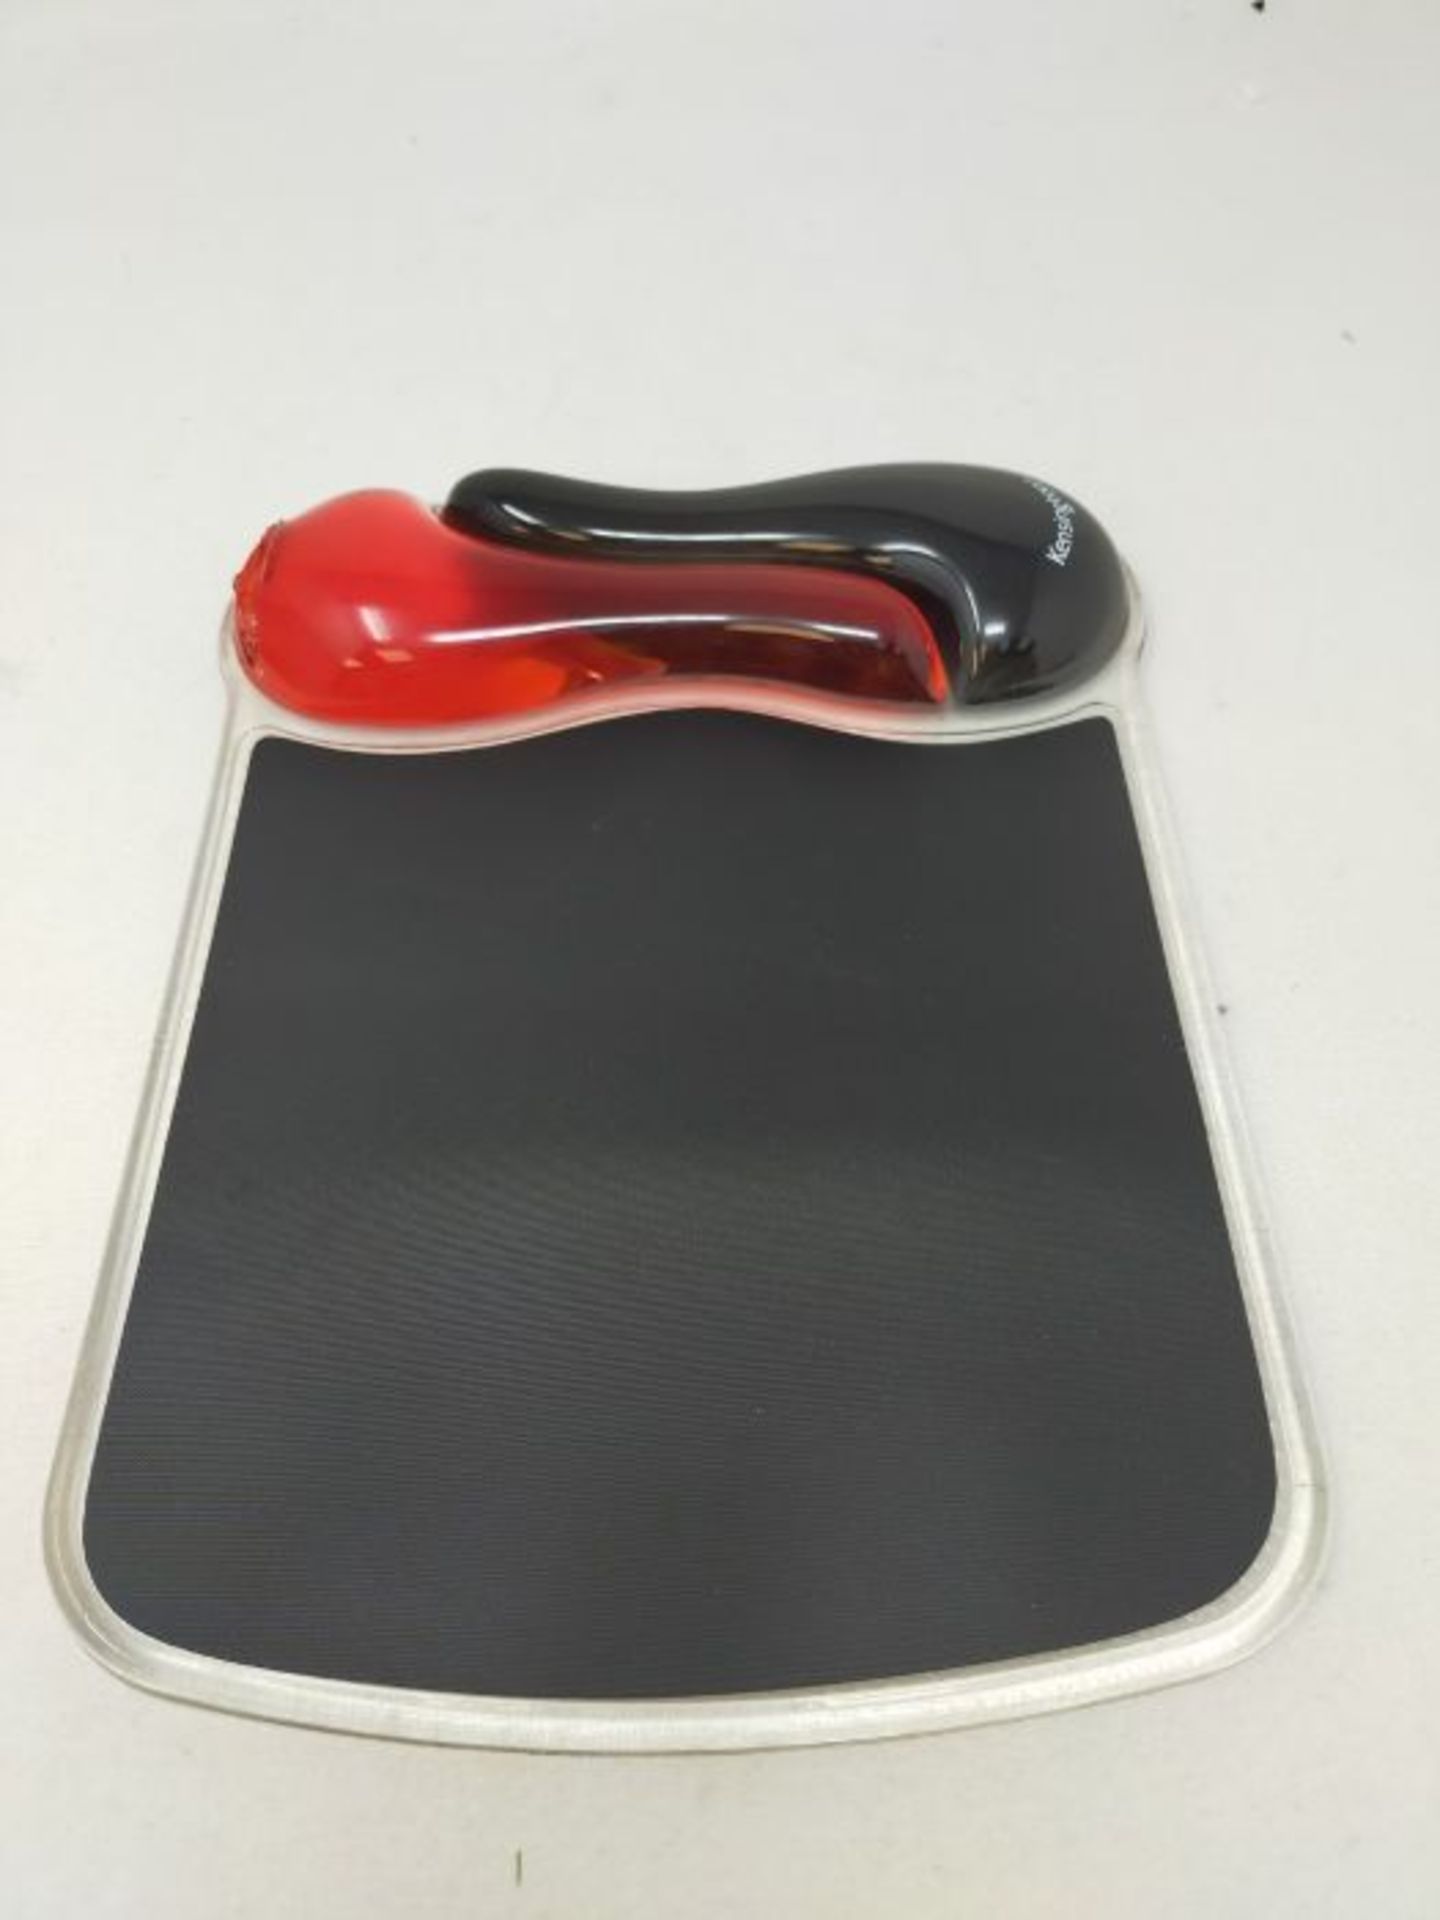 [CRACKED] Kensington Mouse Mat with Wrist Support - Ergonomic Duo Gel mouse mat, compa - Image 3 of 3